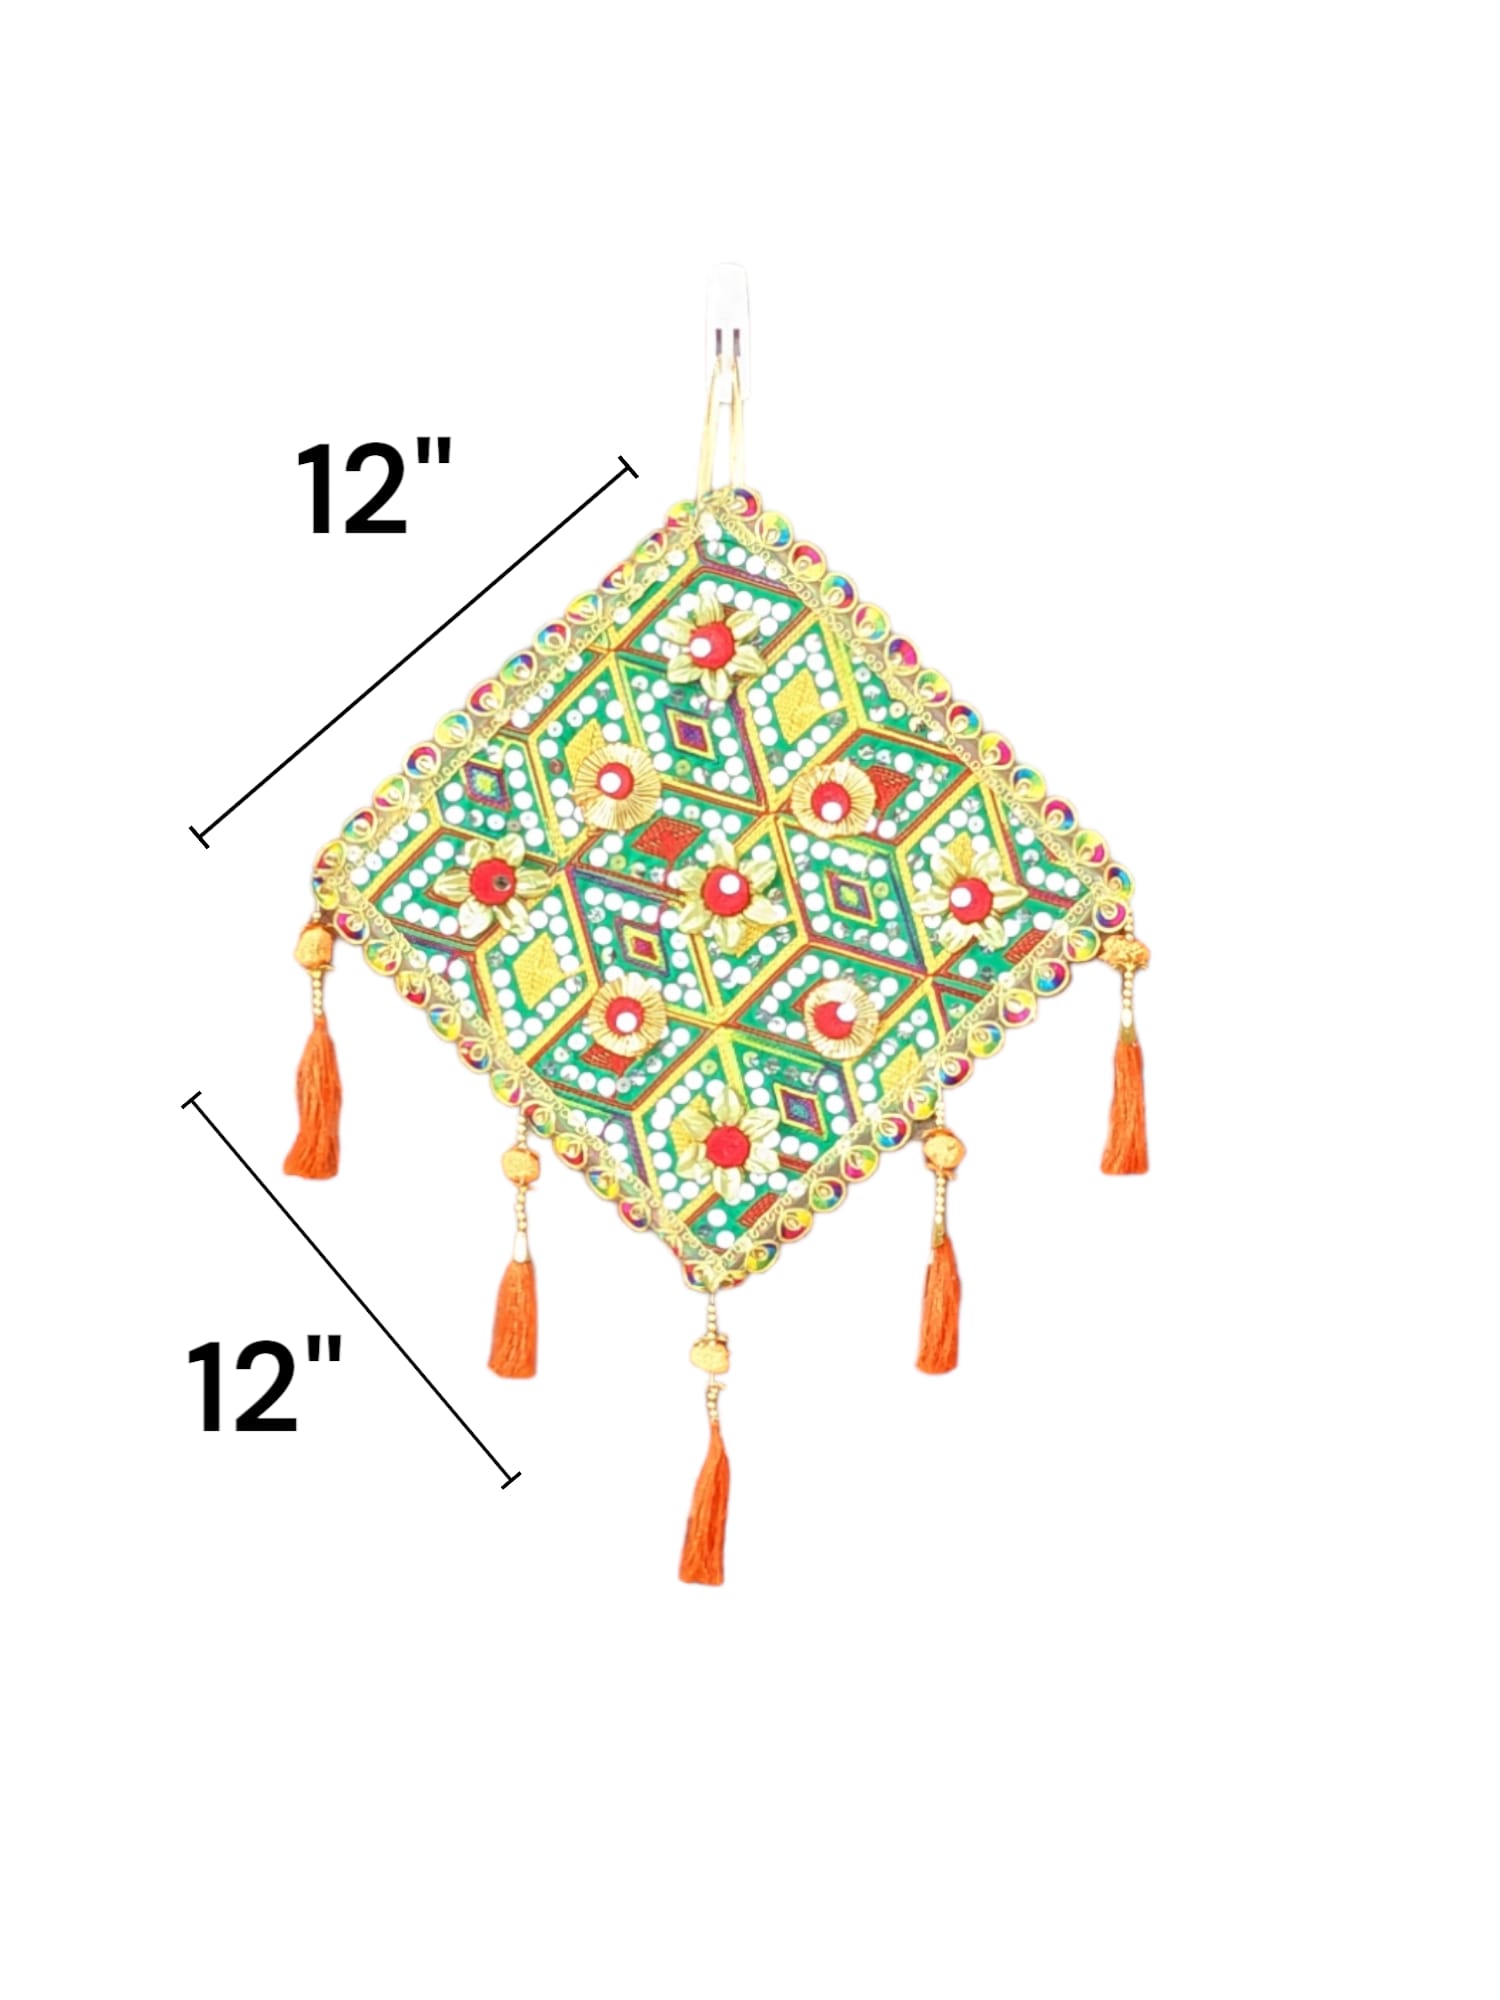 Image of handcrafted kite shaped wall hanging for home decor and Diwali decorations in Canada and the US.